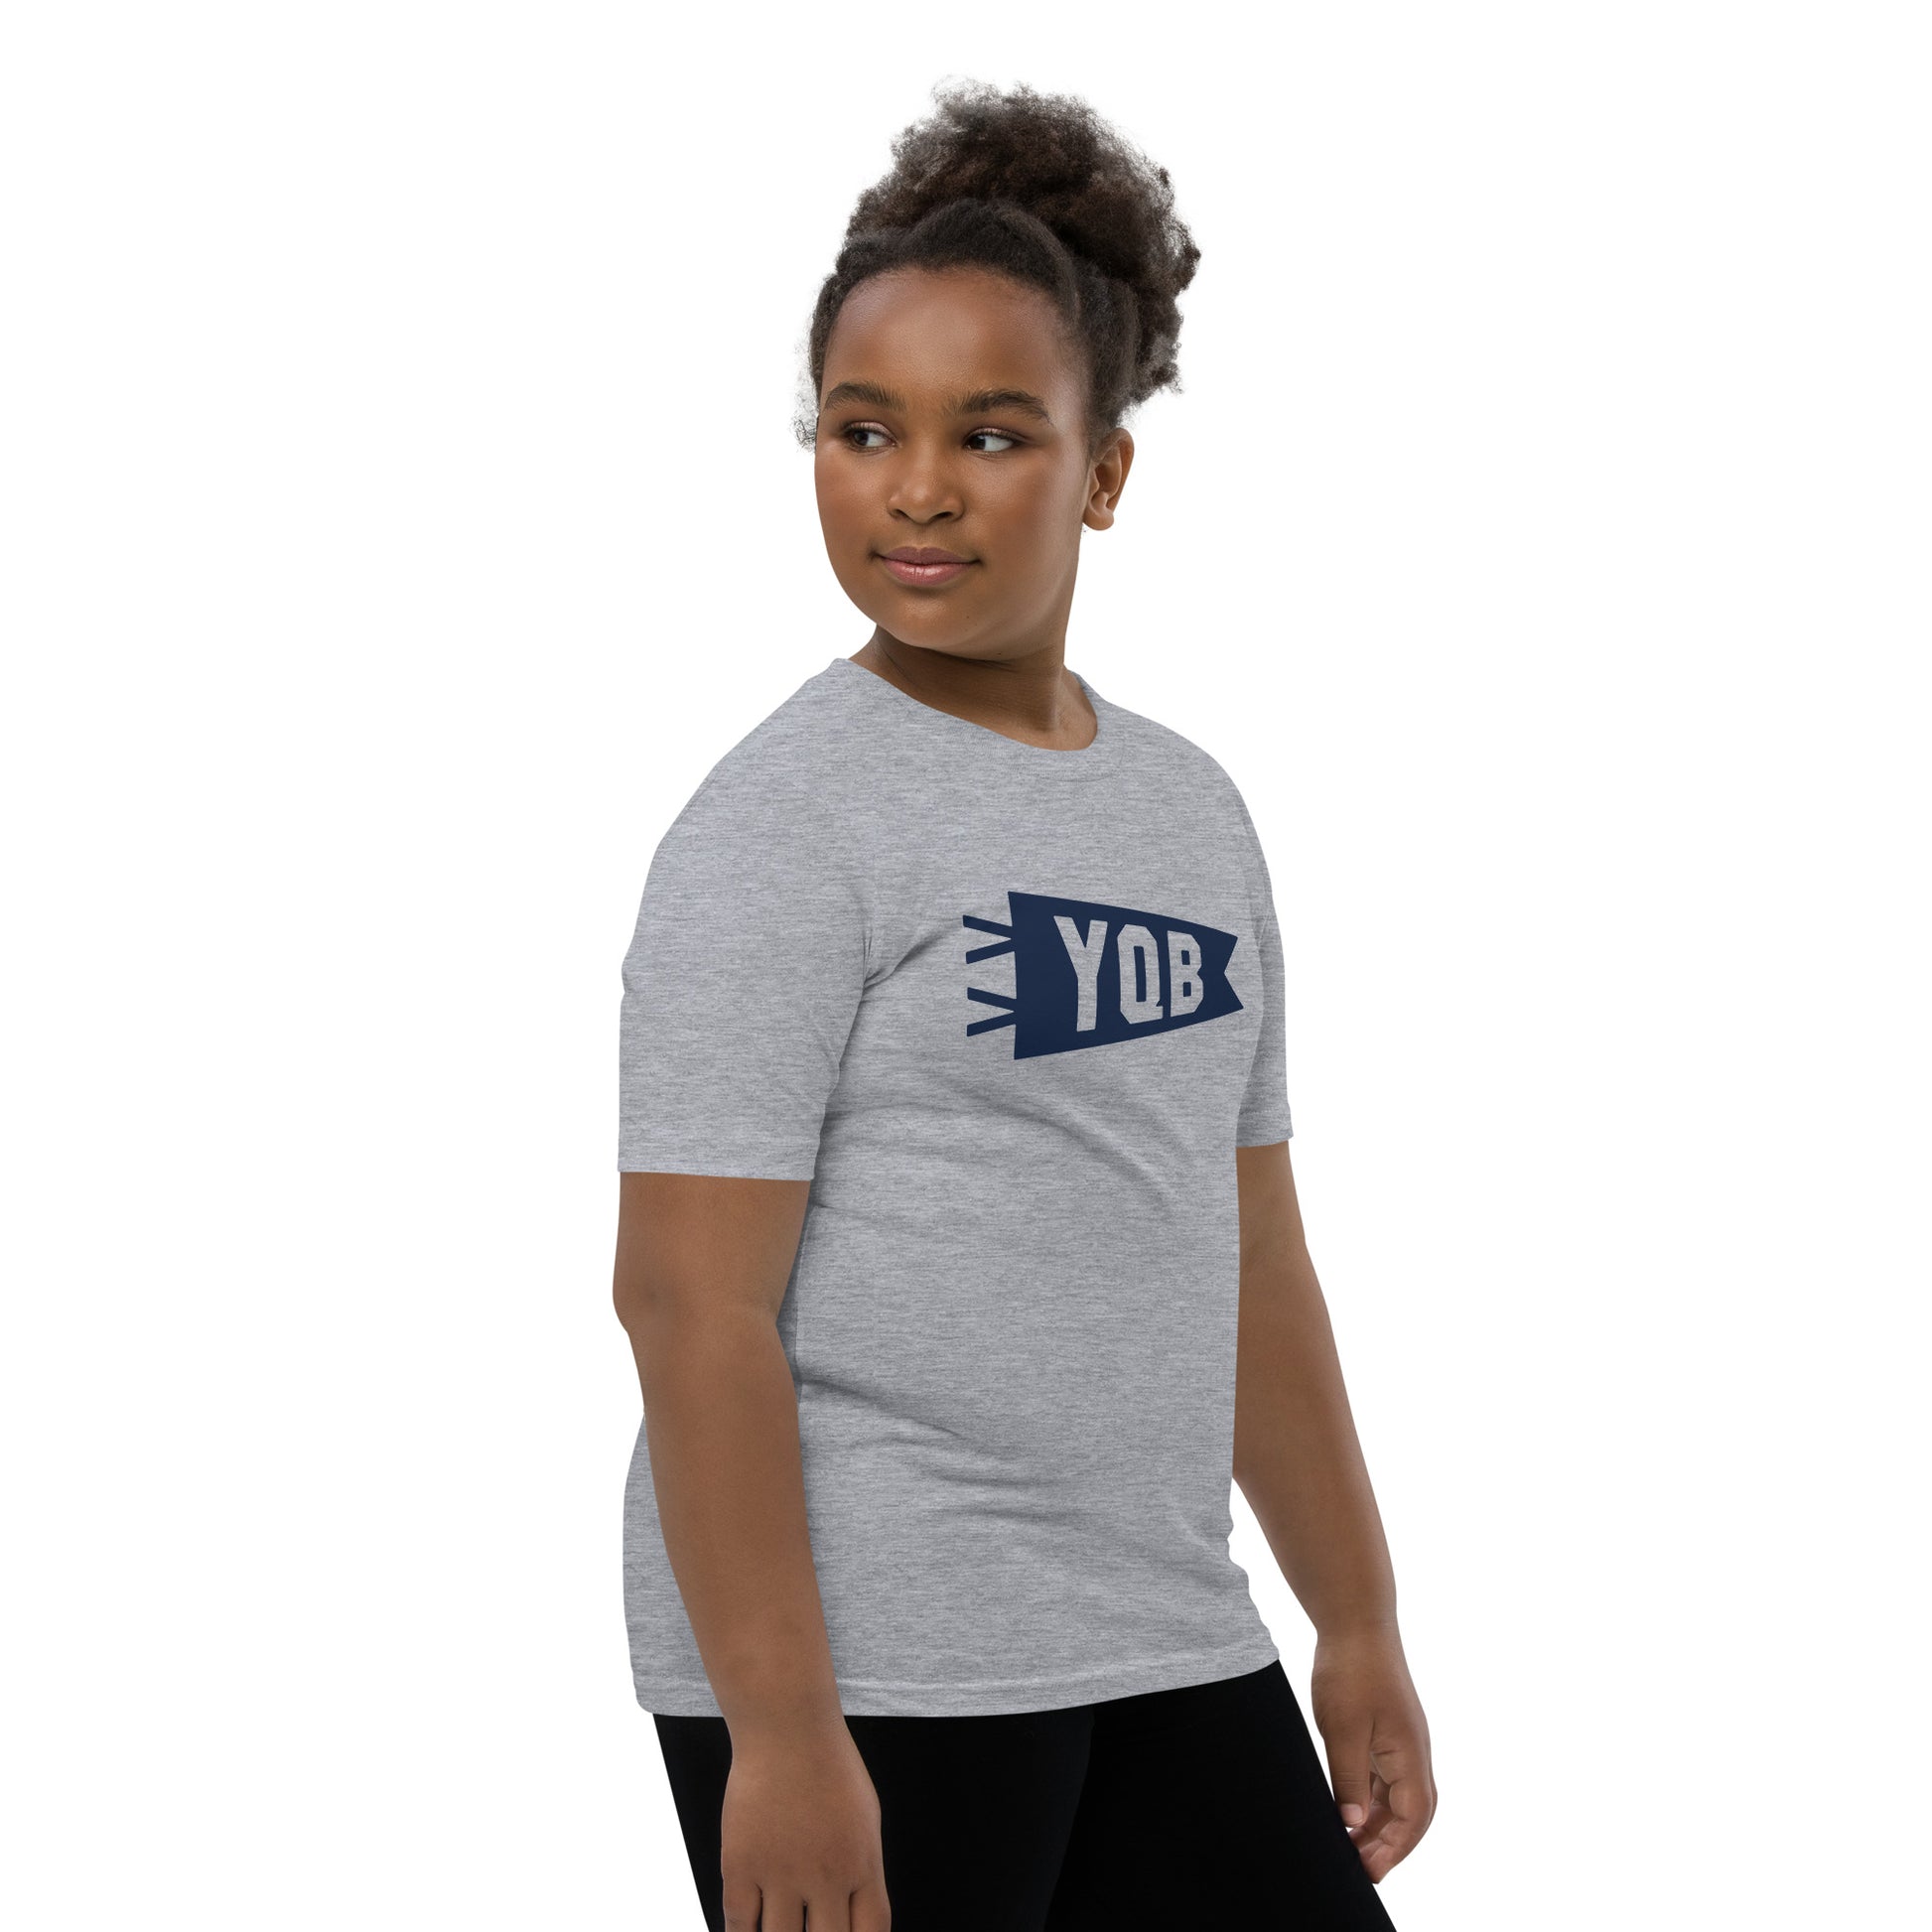 Kid's Airport Code Tee - Navy Blue Graphic • YQB Quebec City • YHM Designs - Image 03